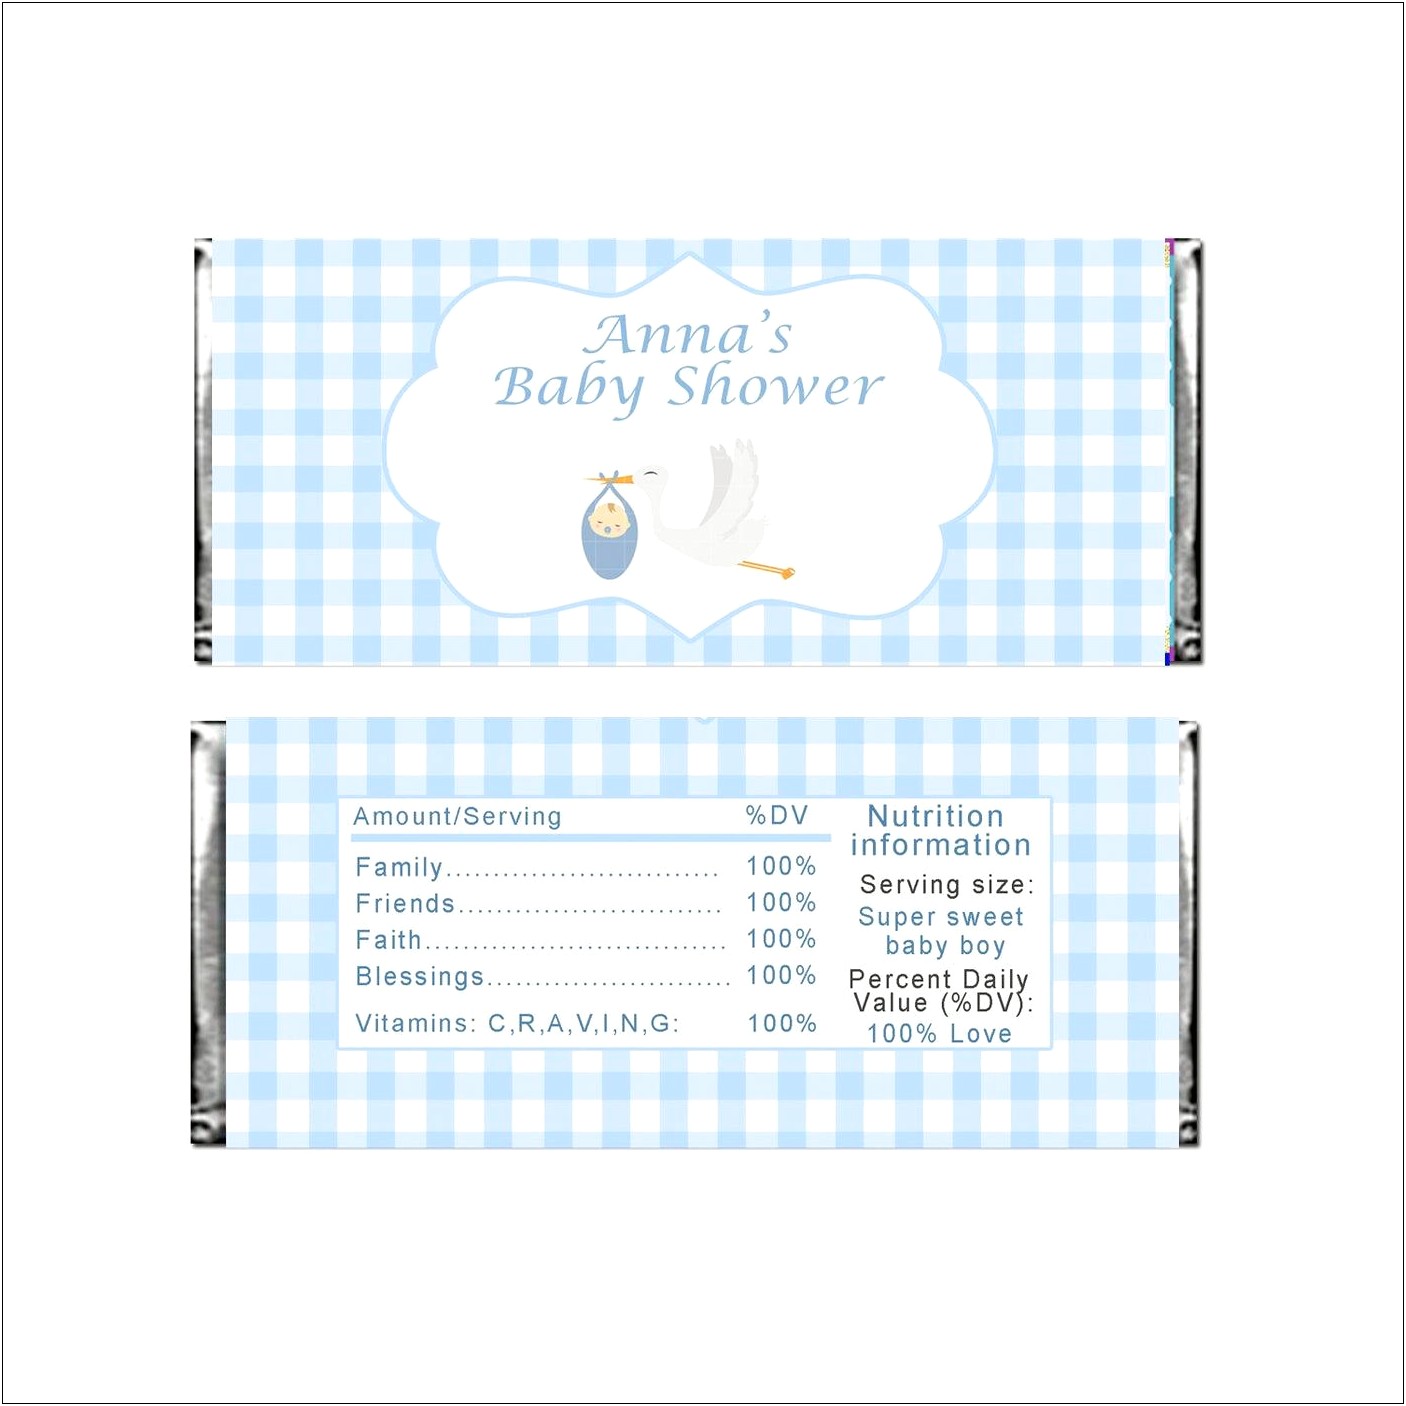 Candy Wrapper Baby Shower Free Template